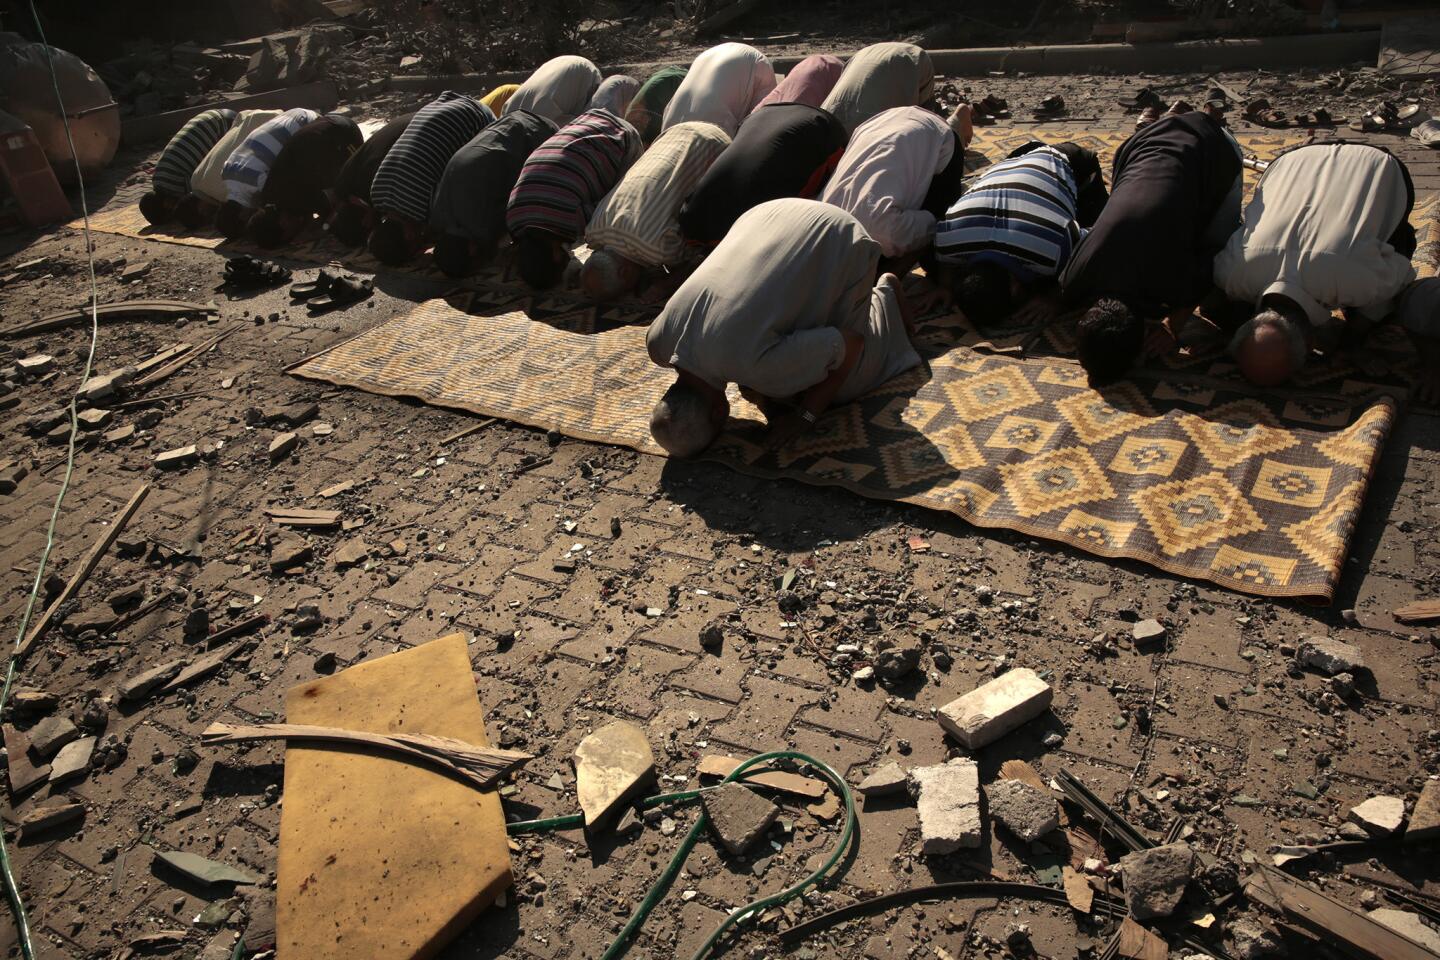 Praying amidst the rubble